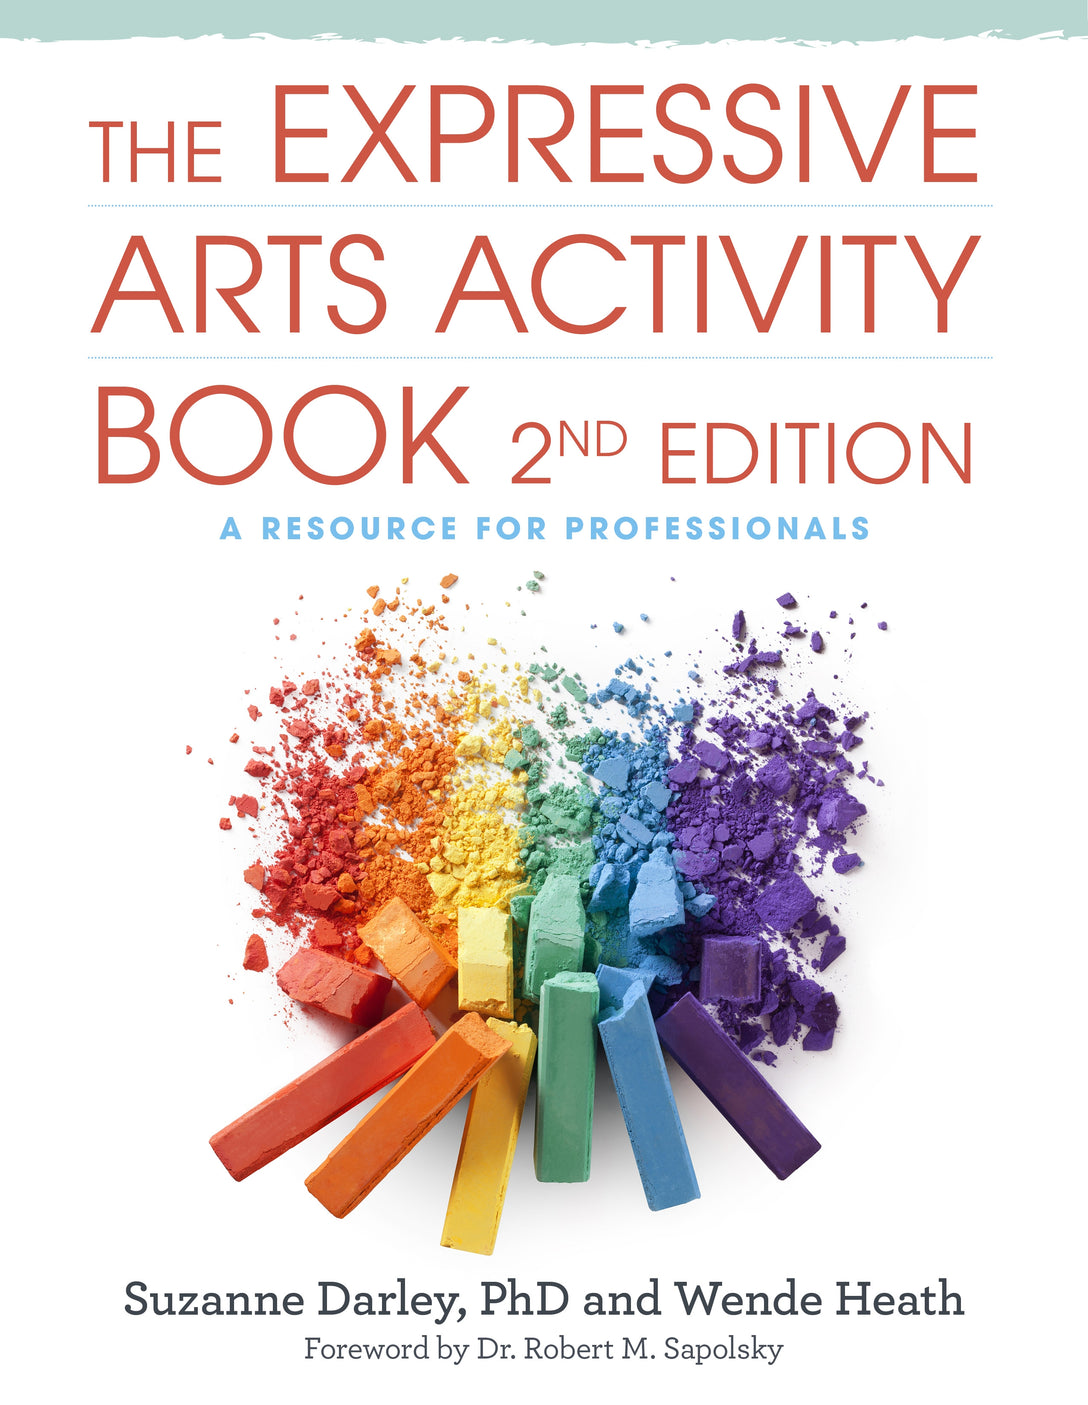 The Expressive Arts Activity Book, 2nd edition by Wende Heath, Suzanne Darley, Dr. Robert M. Sapolsky